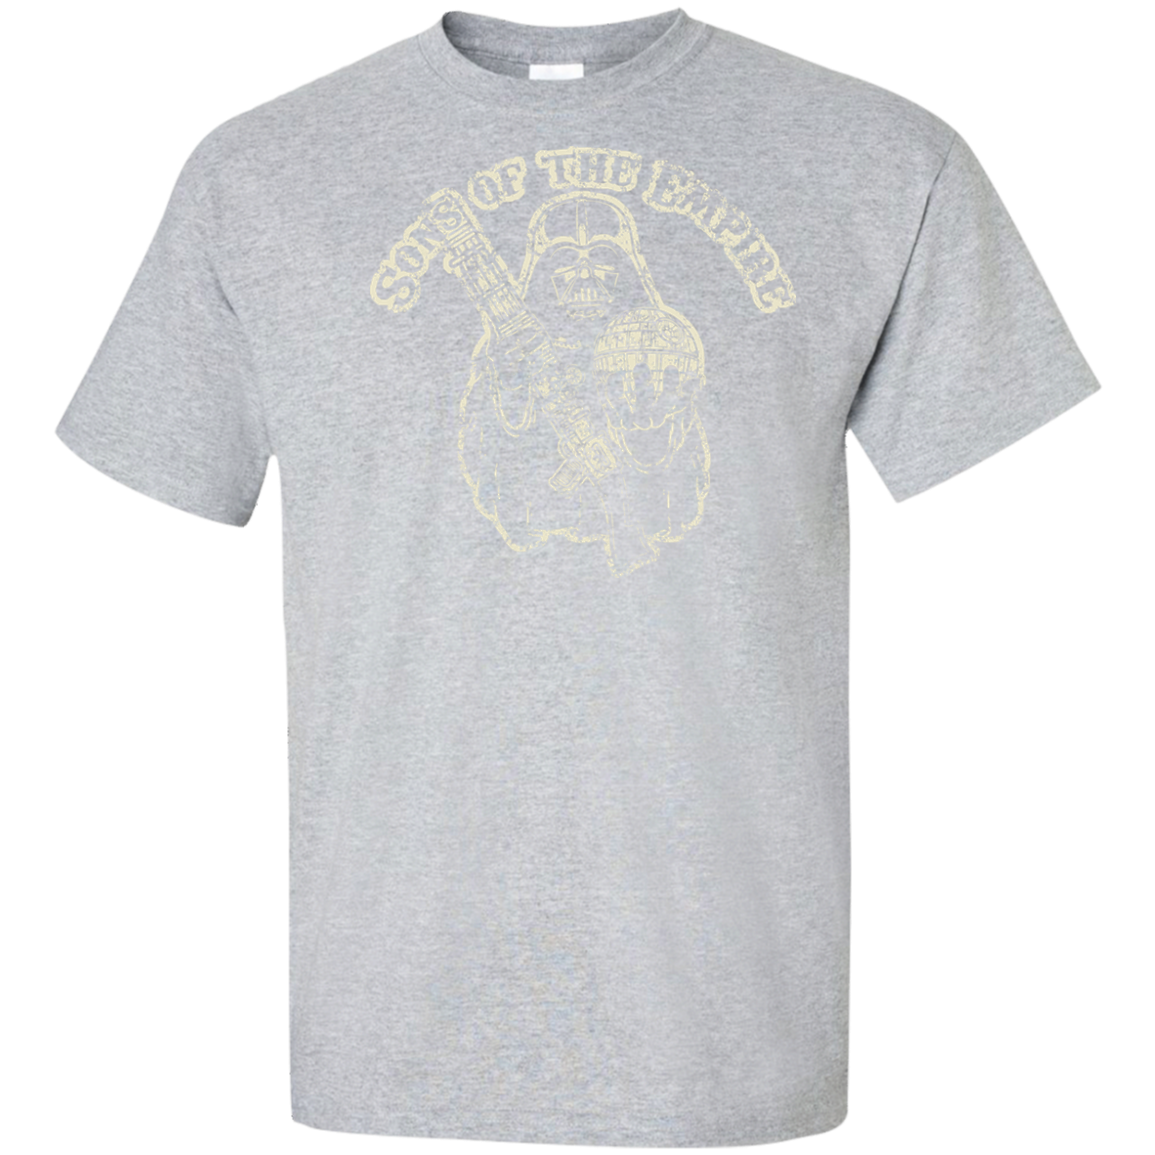 Sons of the empire Tall T-Shirt